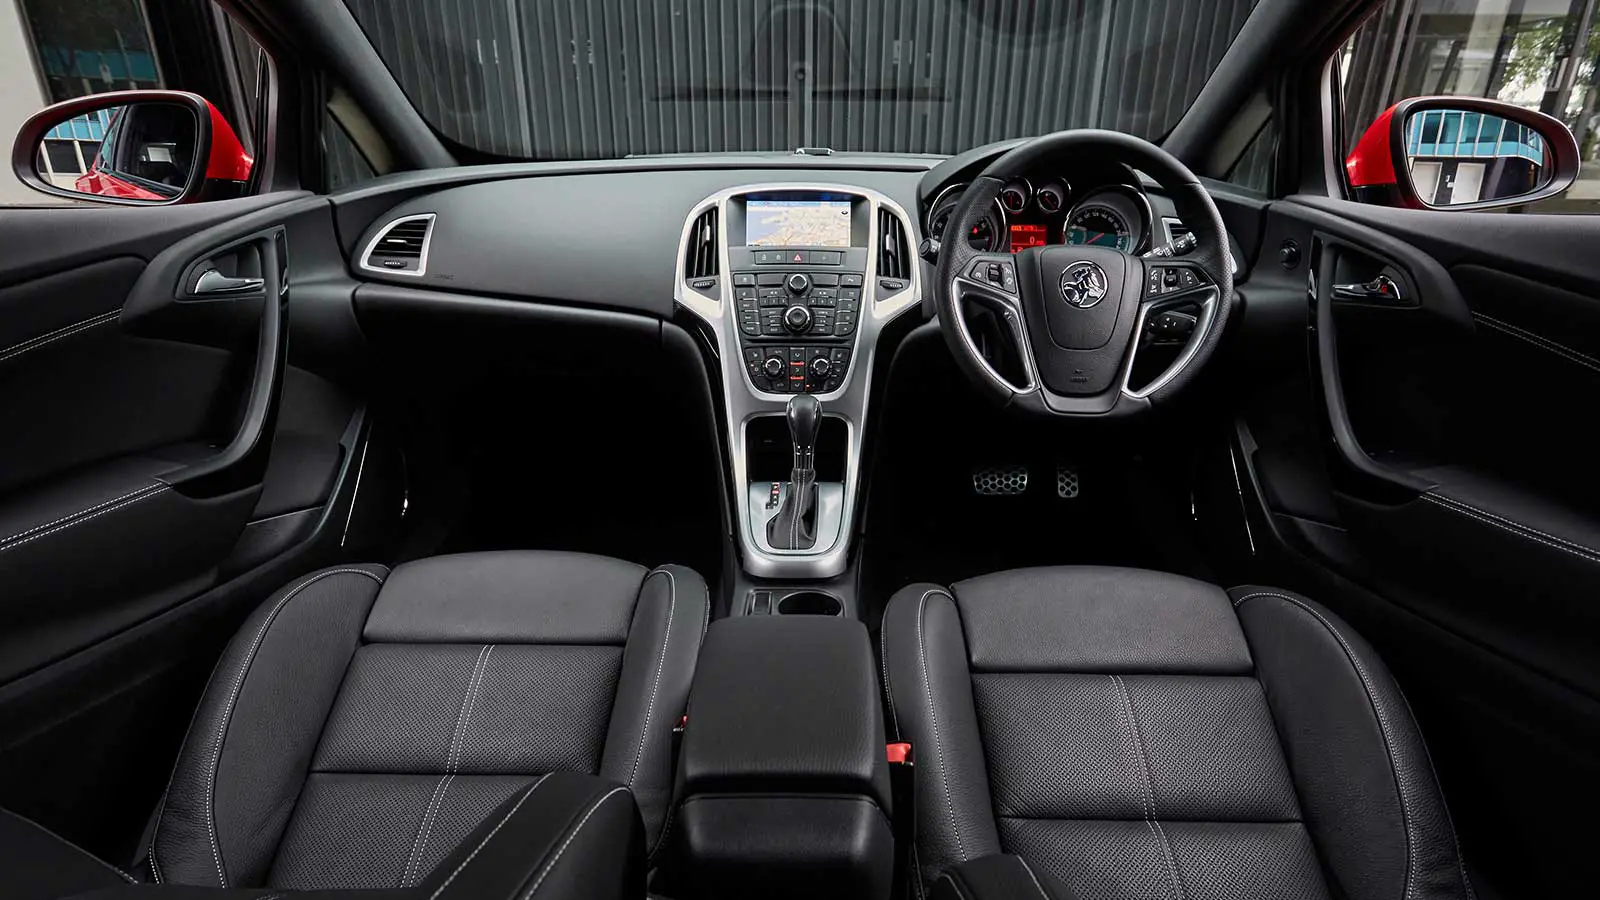 Holden Astra GTC Sport Interior front view